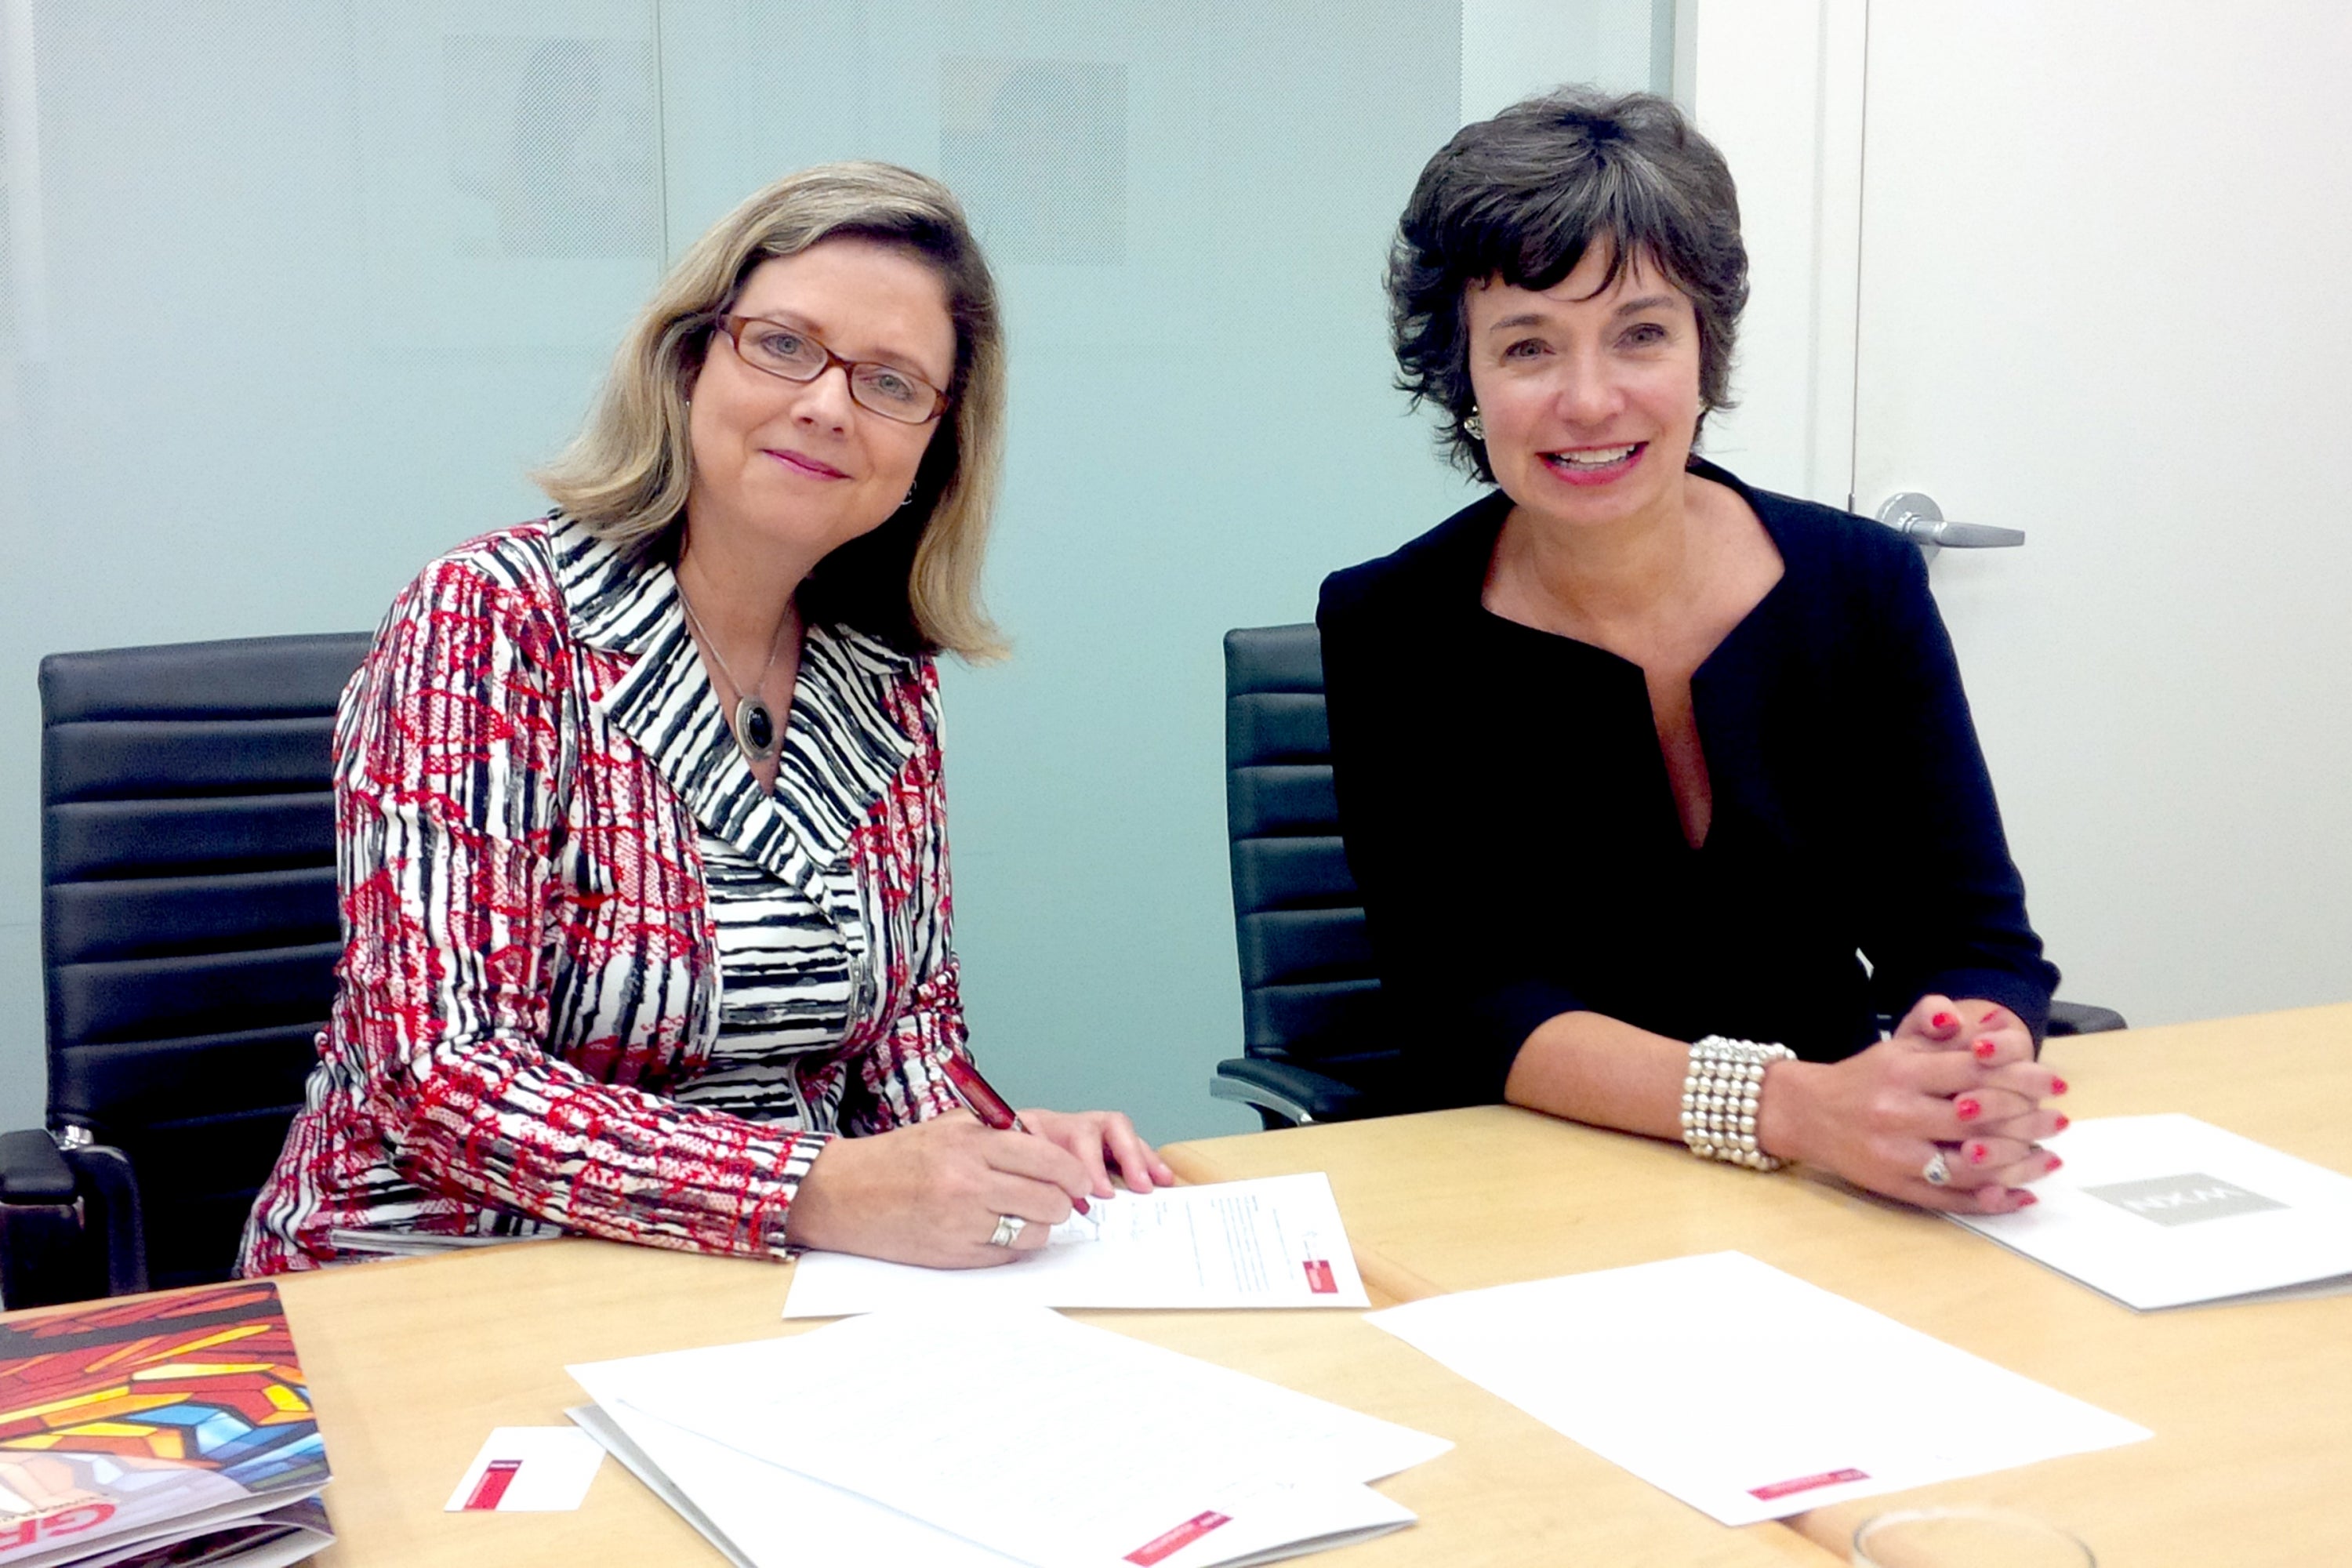 Susan Schultz Huxman and Women’s Executive Network  Founder Pamela Jeffery sign papers for the new MPACS award.